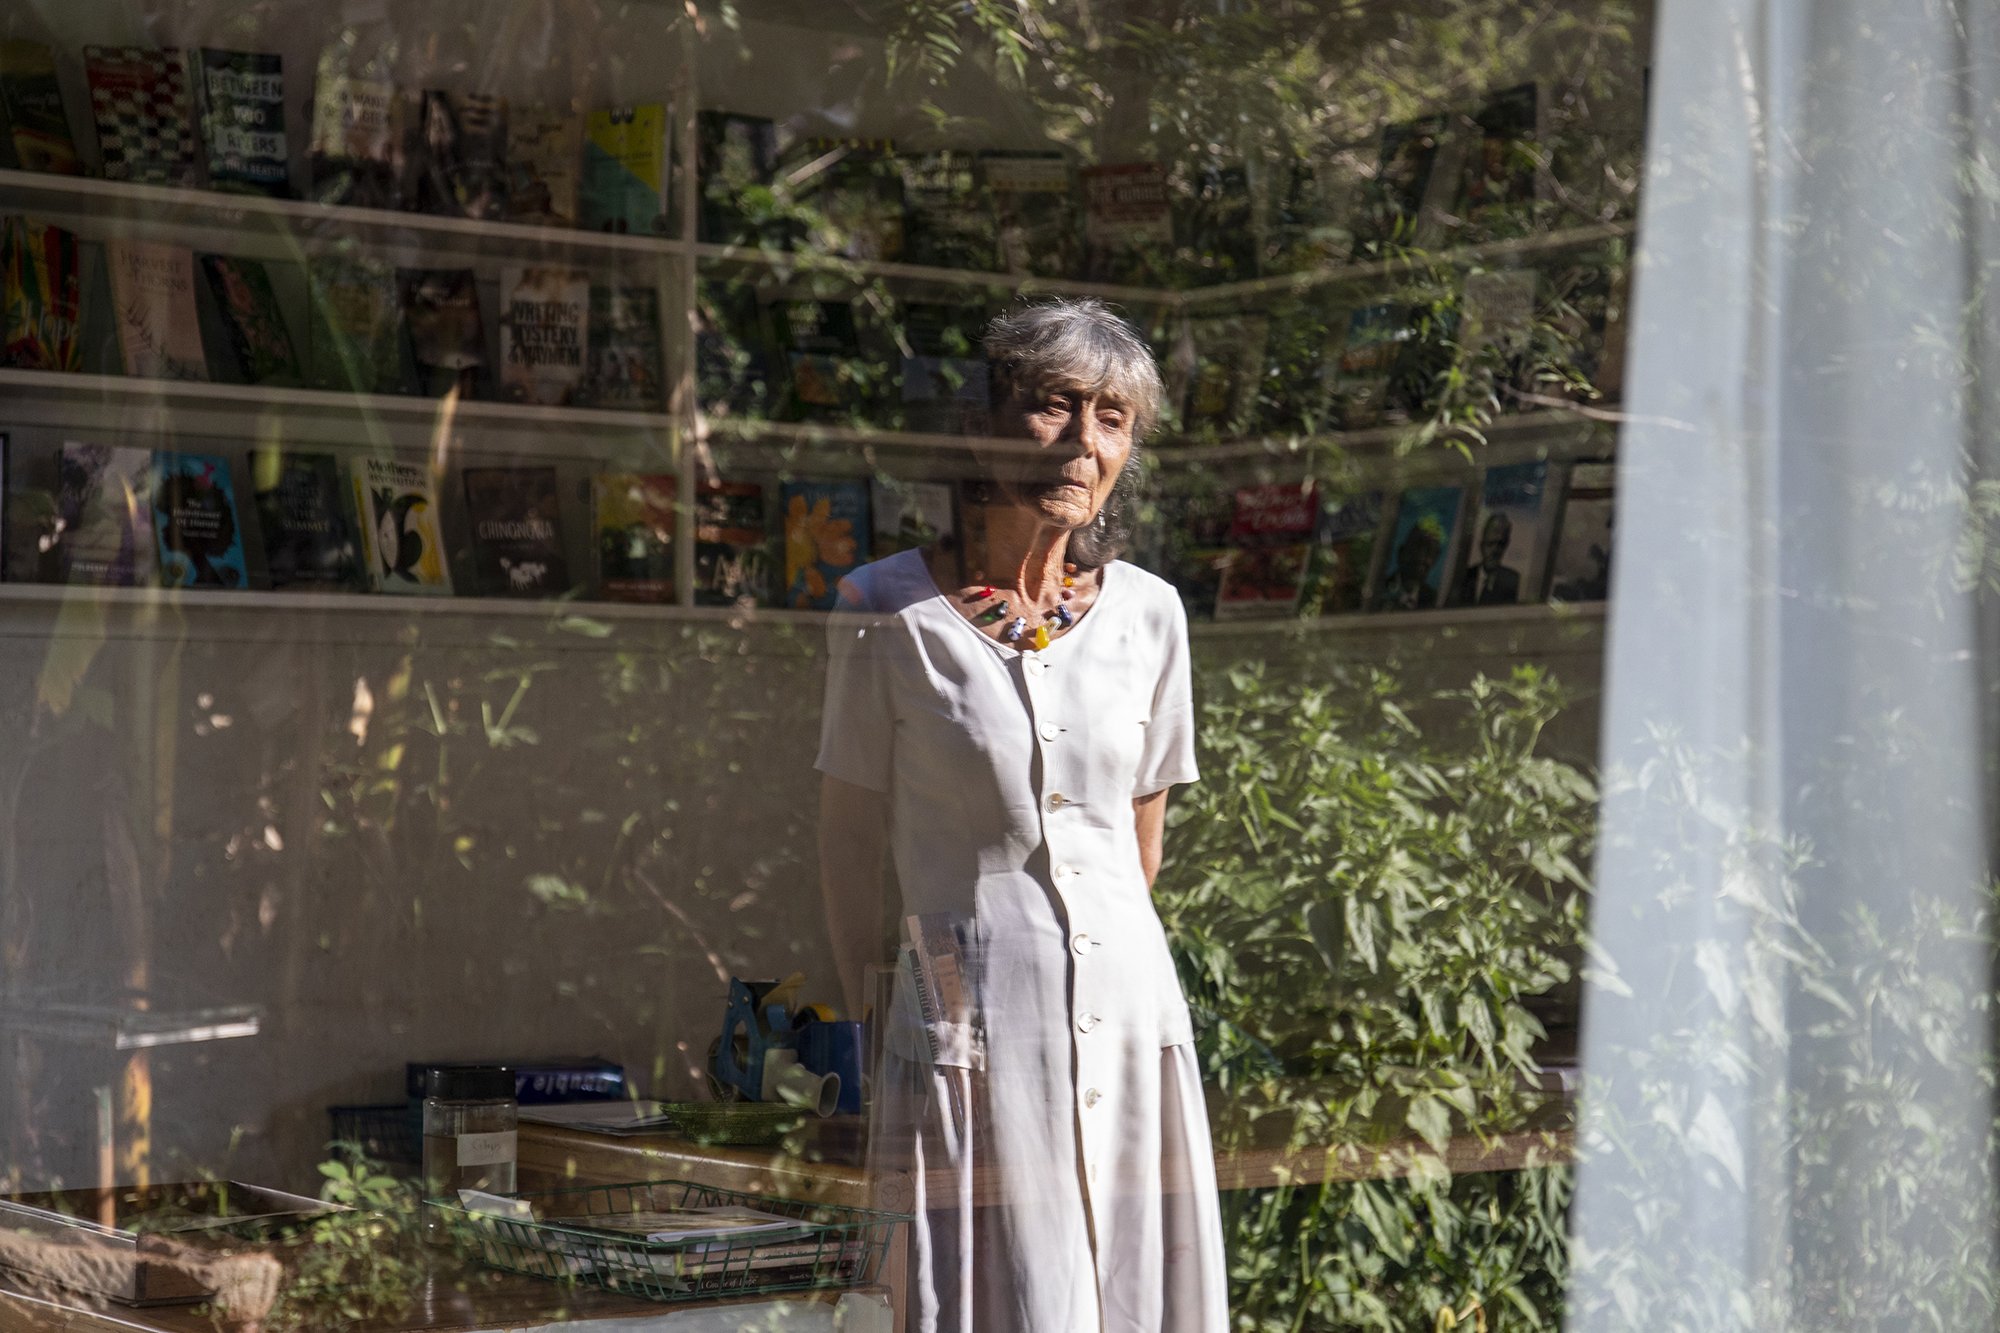  A portrait of Zimbabwean publisher, editor, researcher and writer, Irene Staunton in her garden at Weaver Press in Harare, Zimbabwe.  She is co-founder the publishing house with her husband Murray McCartney. -  For The Guardian  